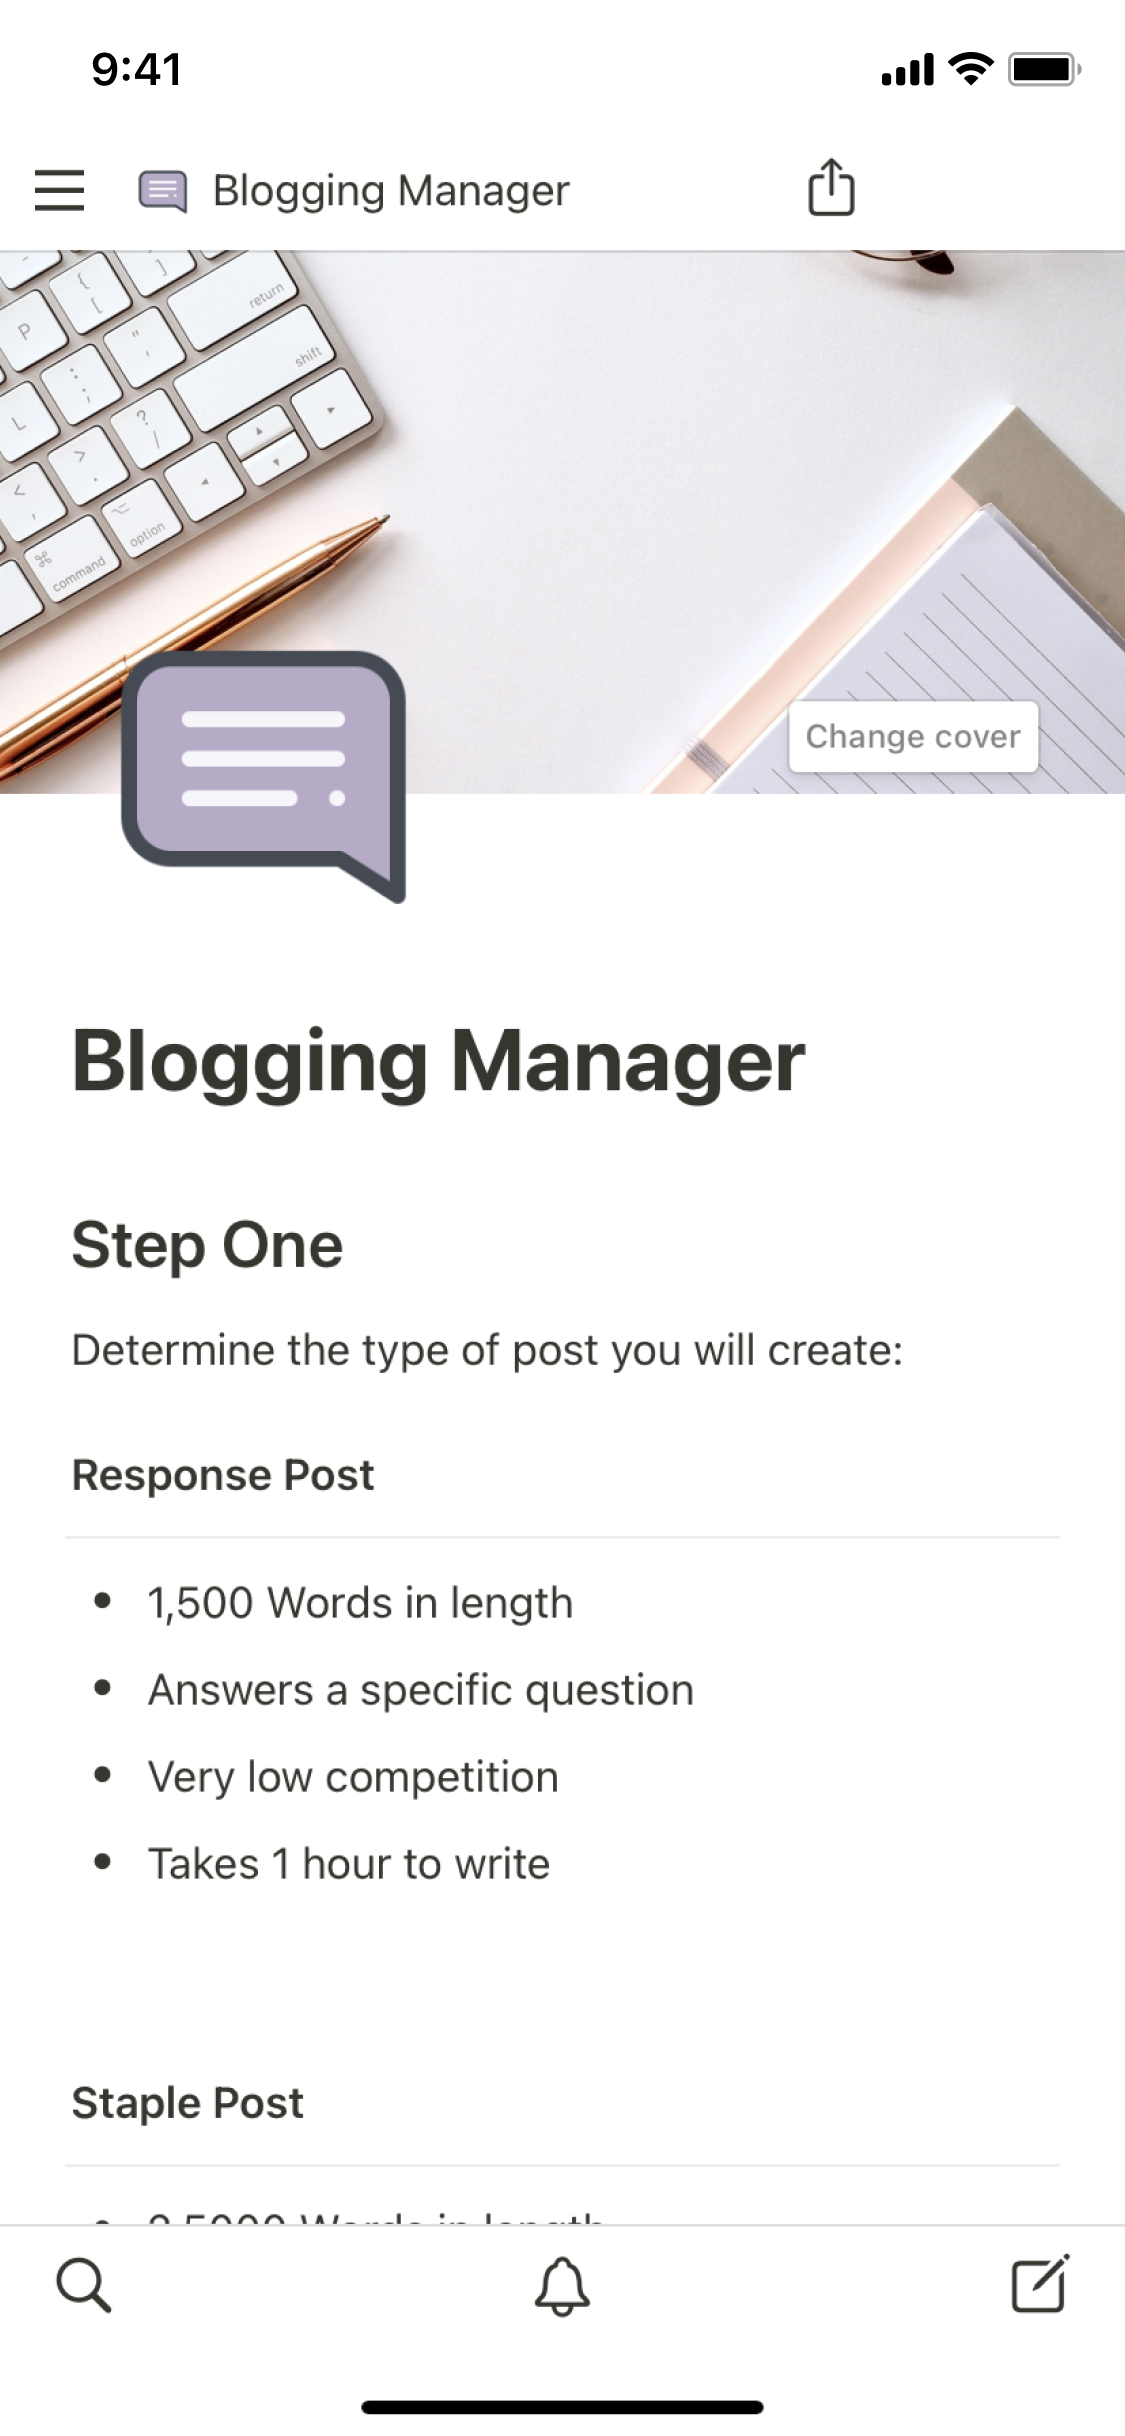 The mobile image for the Blogging manager template